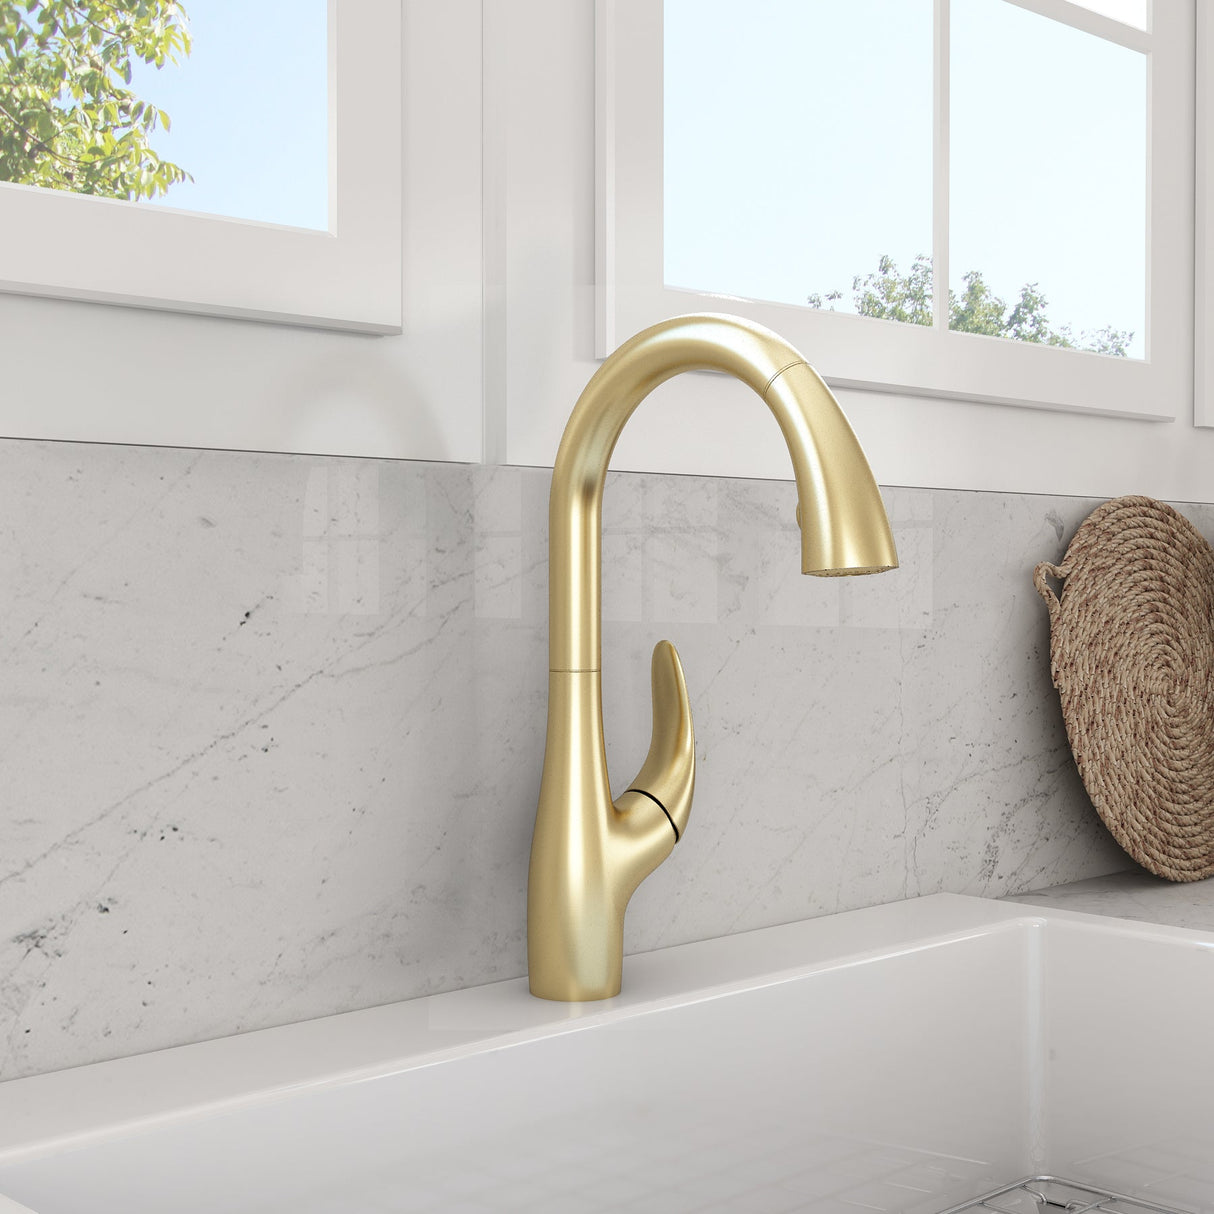 BOCCHI 2024 0001 BG Pagano 2.0 Pull-Down Kitchen Faucet in Brushed Gold